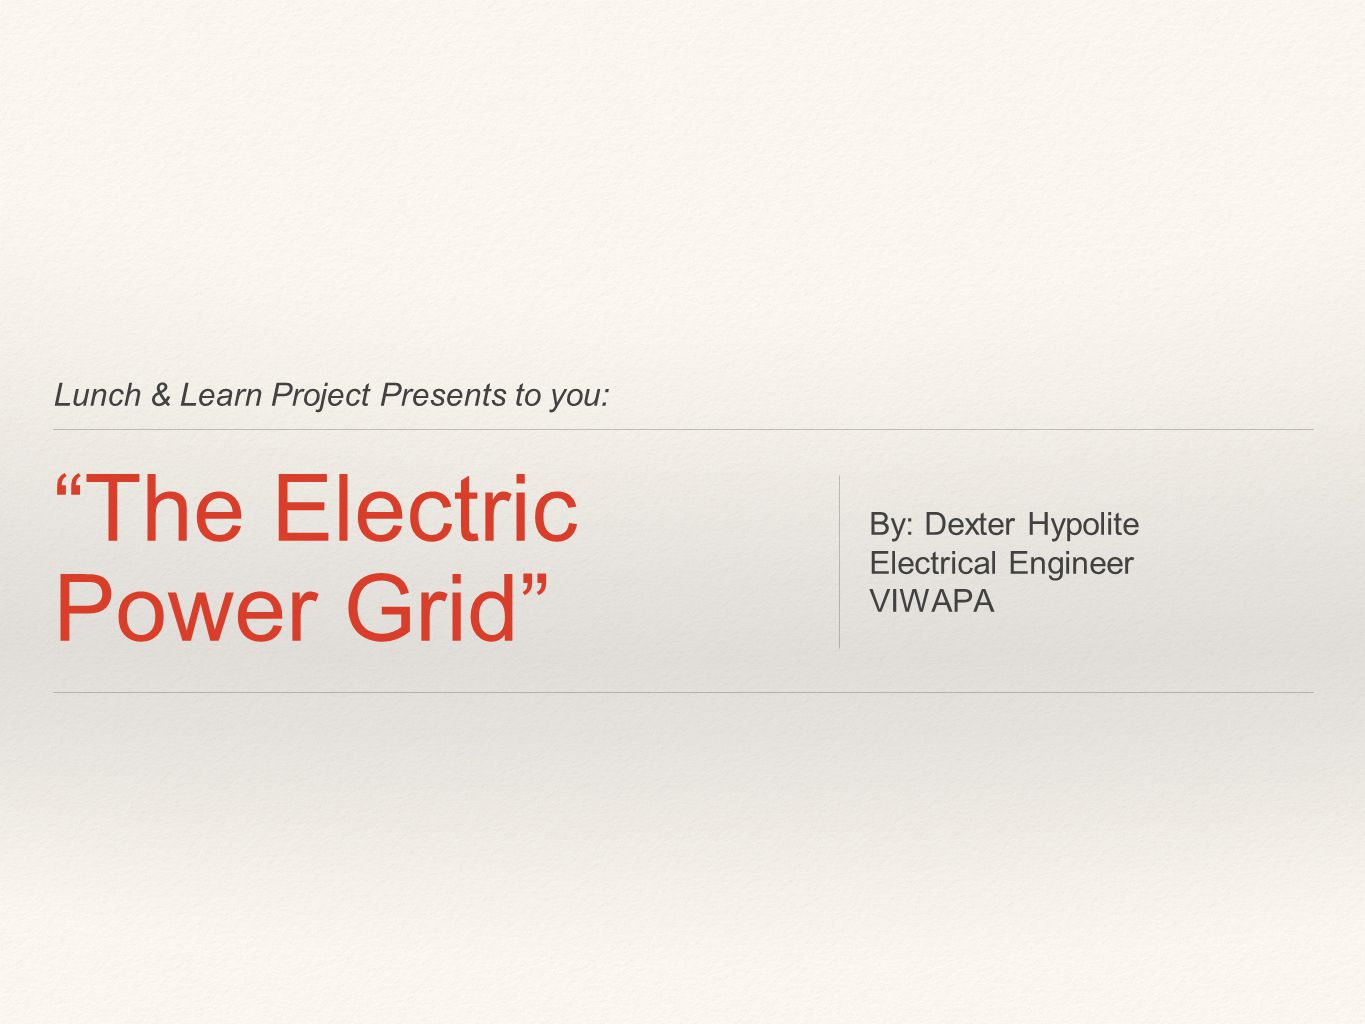 Lunch & Learn Project Presents to you: The Electric Power Grid By: Dexter Hypolite Electrical Engineer VIWAPA